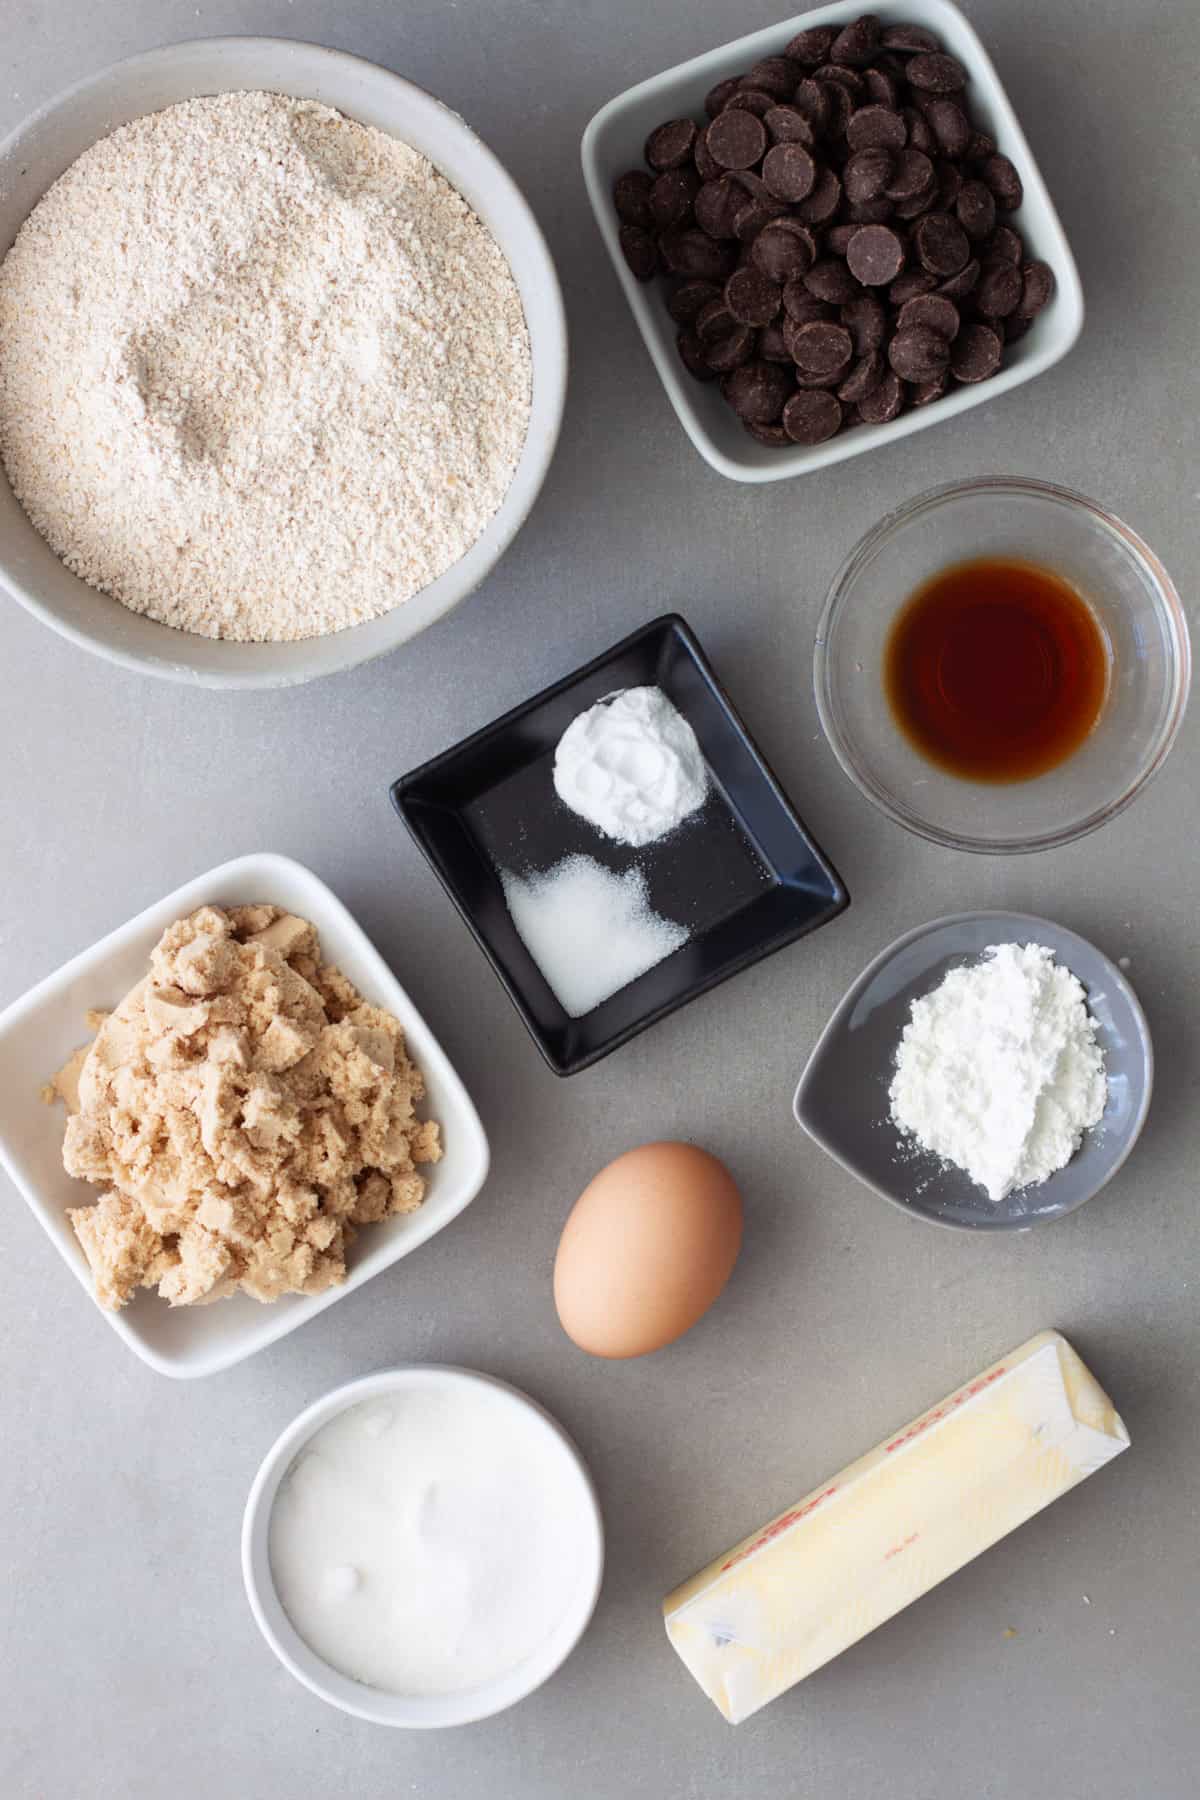 Ingredients for oat flour cookies on a gray table.